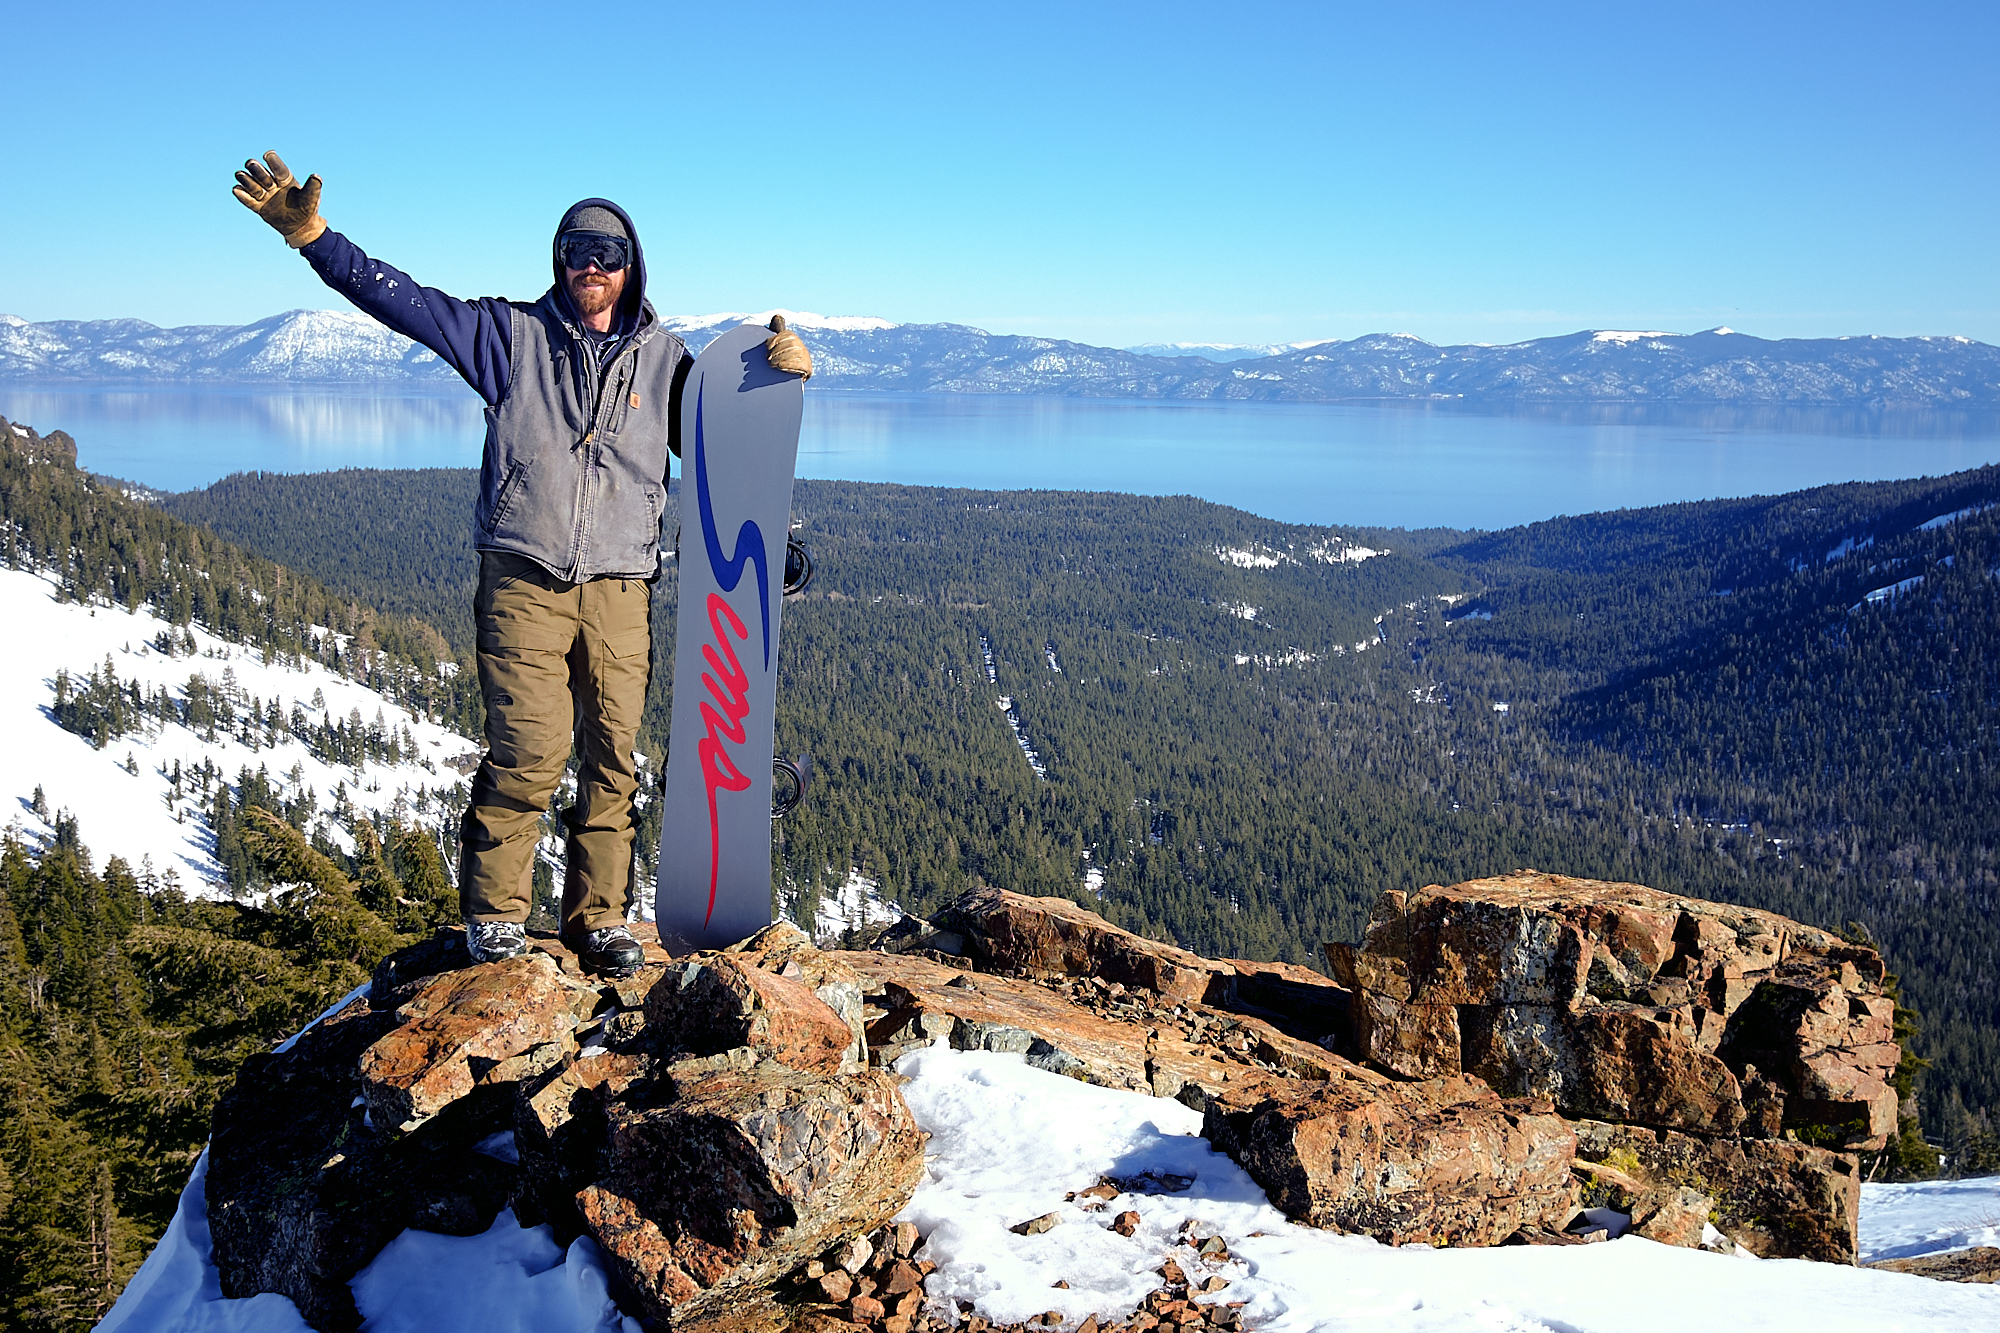  Bryan and I took a little hike over the high traverse at Alpine Meadows on an astoundingly gorgeous day. | Alpine Meadows, CA 1/25/2019 